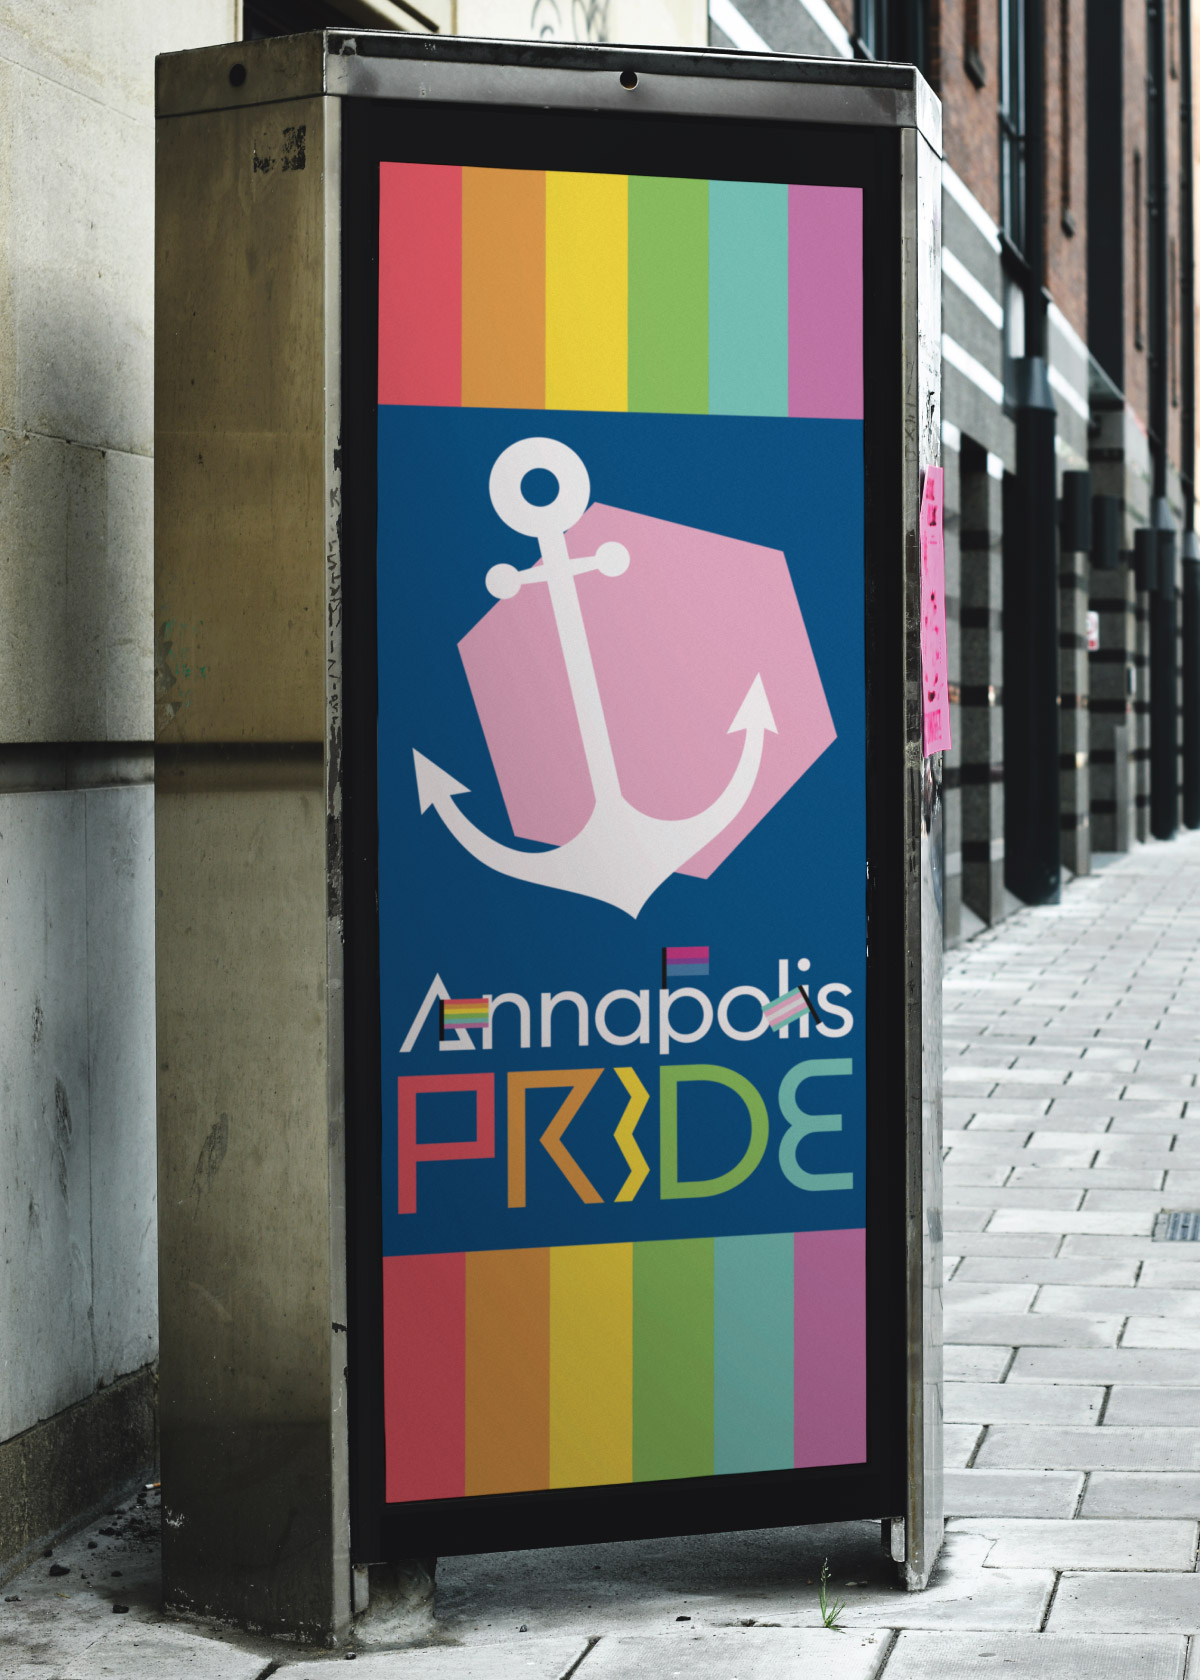 A mockup of what a bus advertisement might look like. It features the anchor icon from earlier on a hot pink backdrop, which is sitting on a navy blue background. Our Annapolis Pride logo is below, and there is a rainbow frame on the top and bottom of the sign.